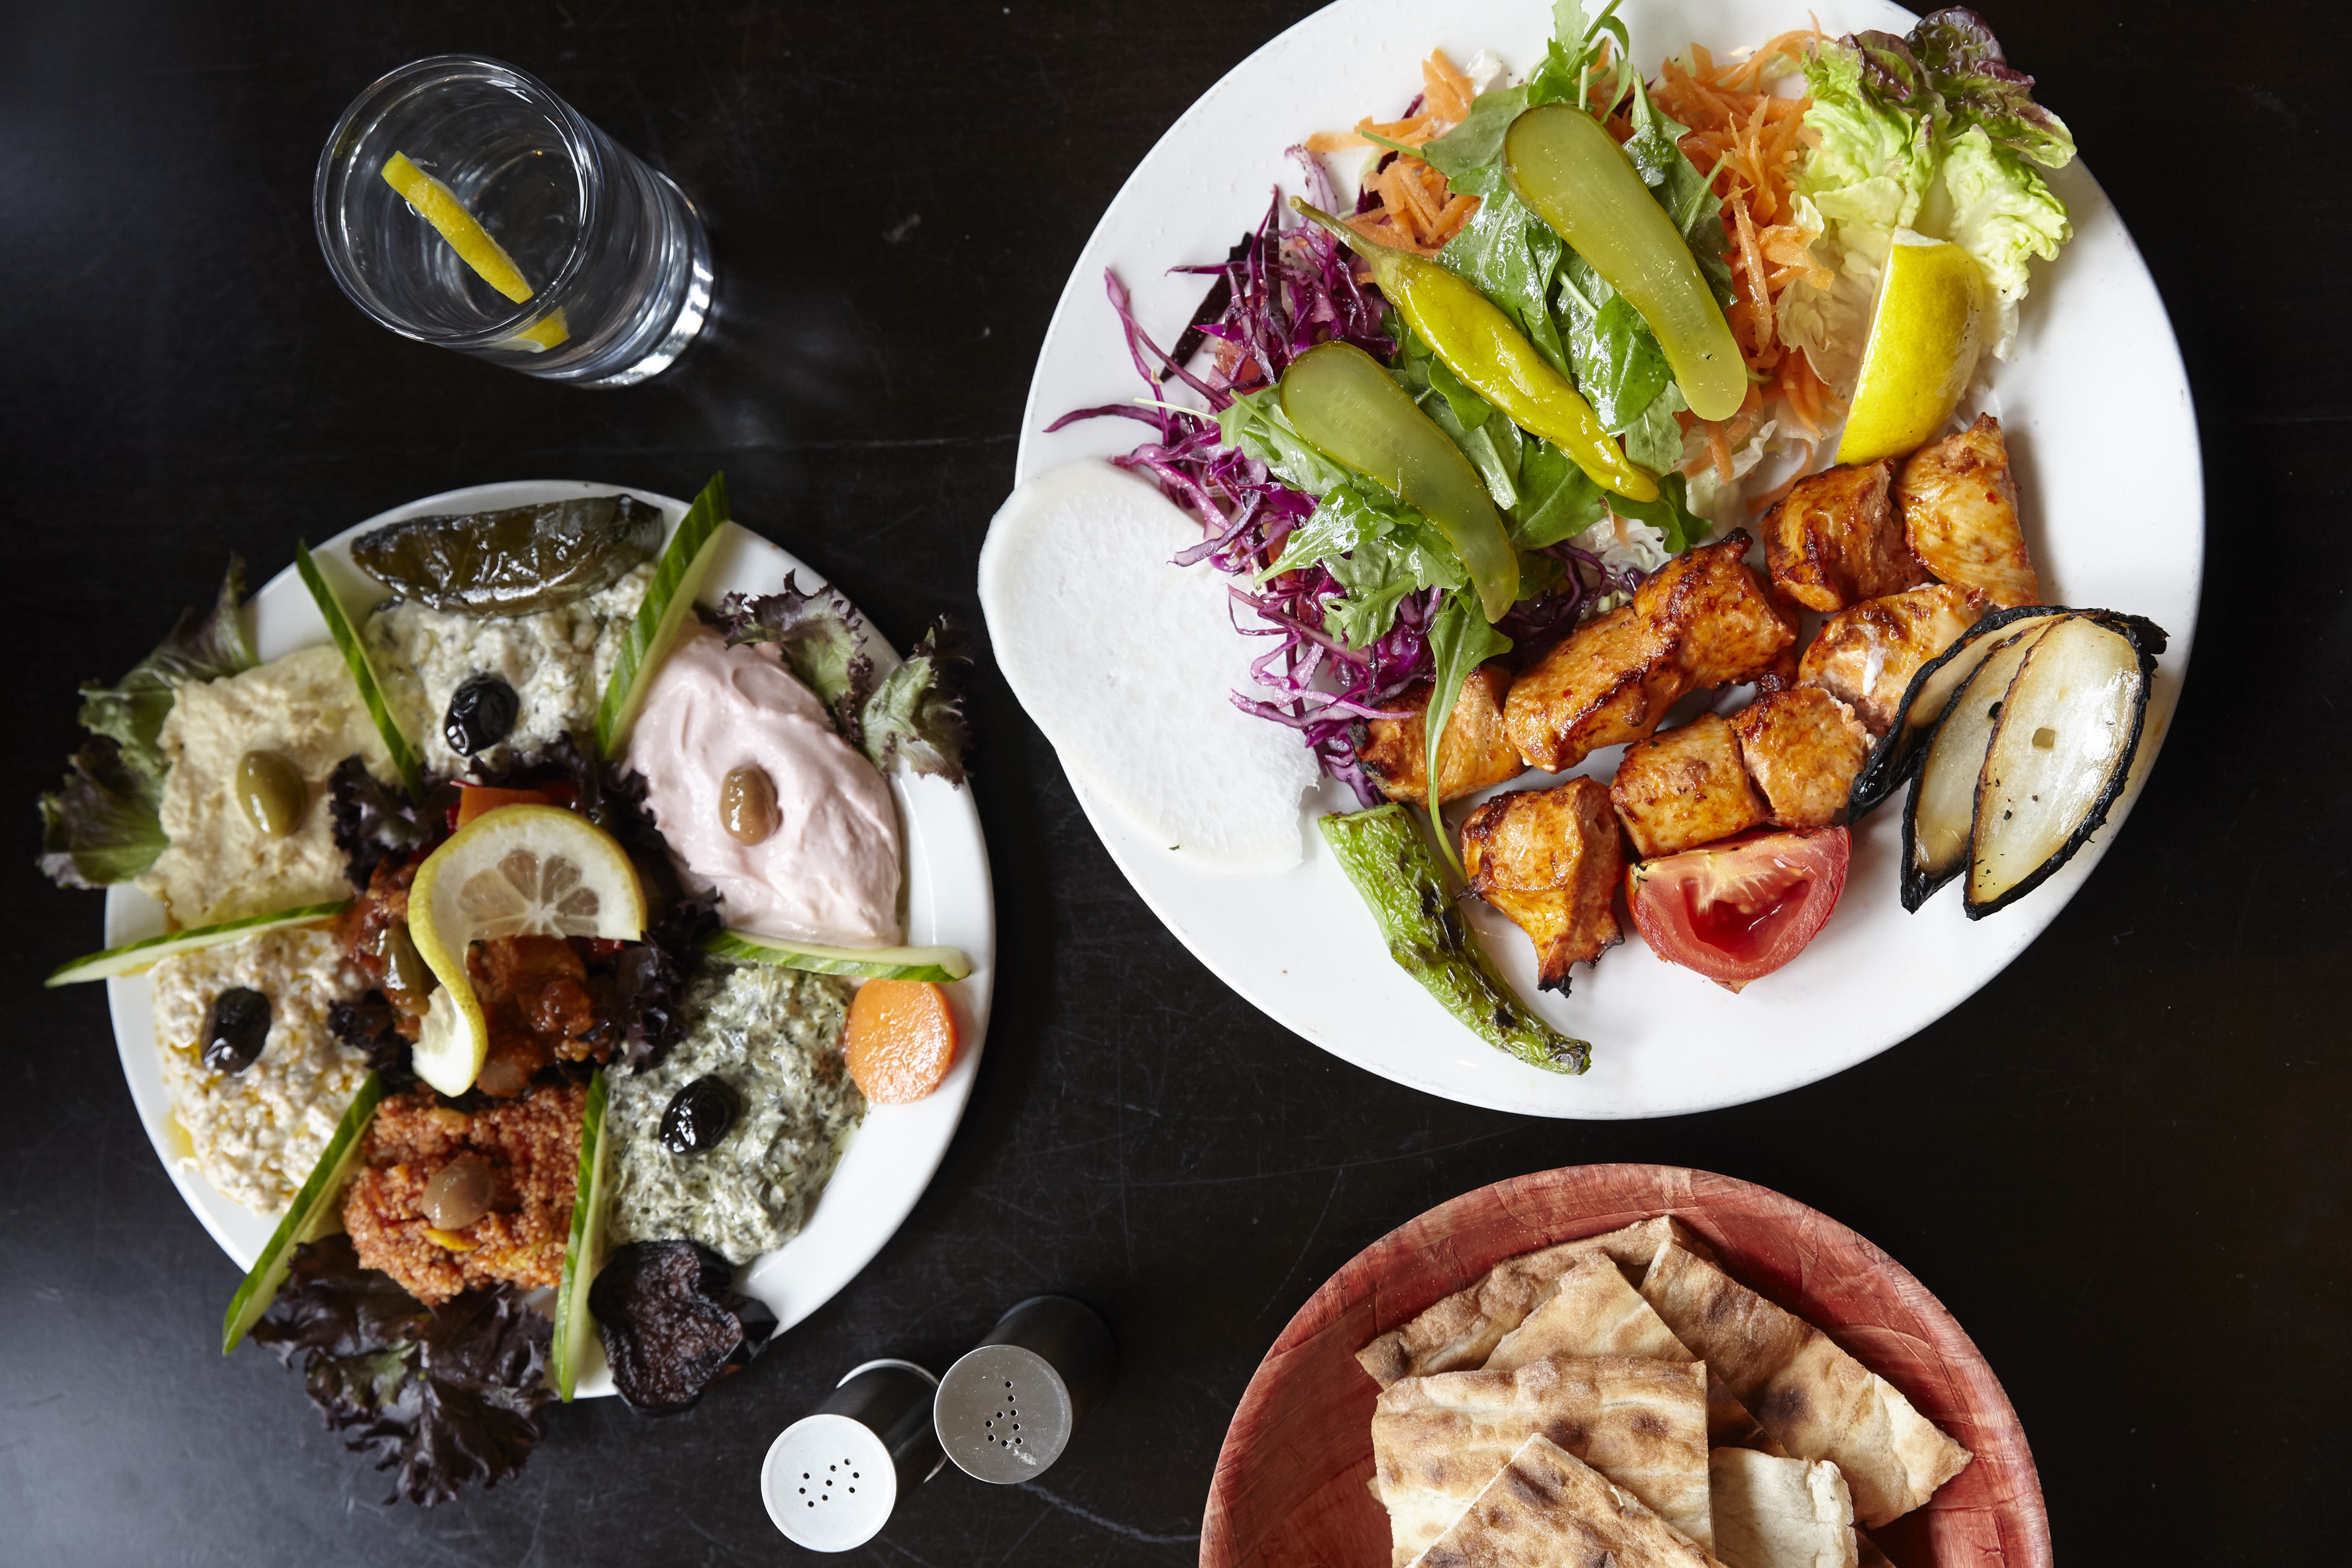 Ocakbasi and mezze at Mangal 2, the Turkish restaurant in Dalston that that forms part of the best 24 hour restaurant travel itinerary for London — where to eat with one day in the city